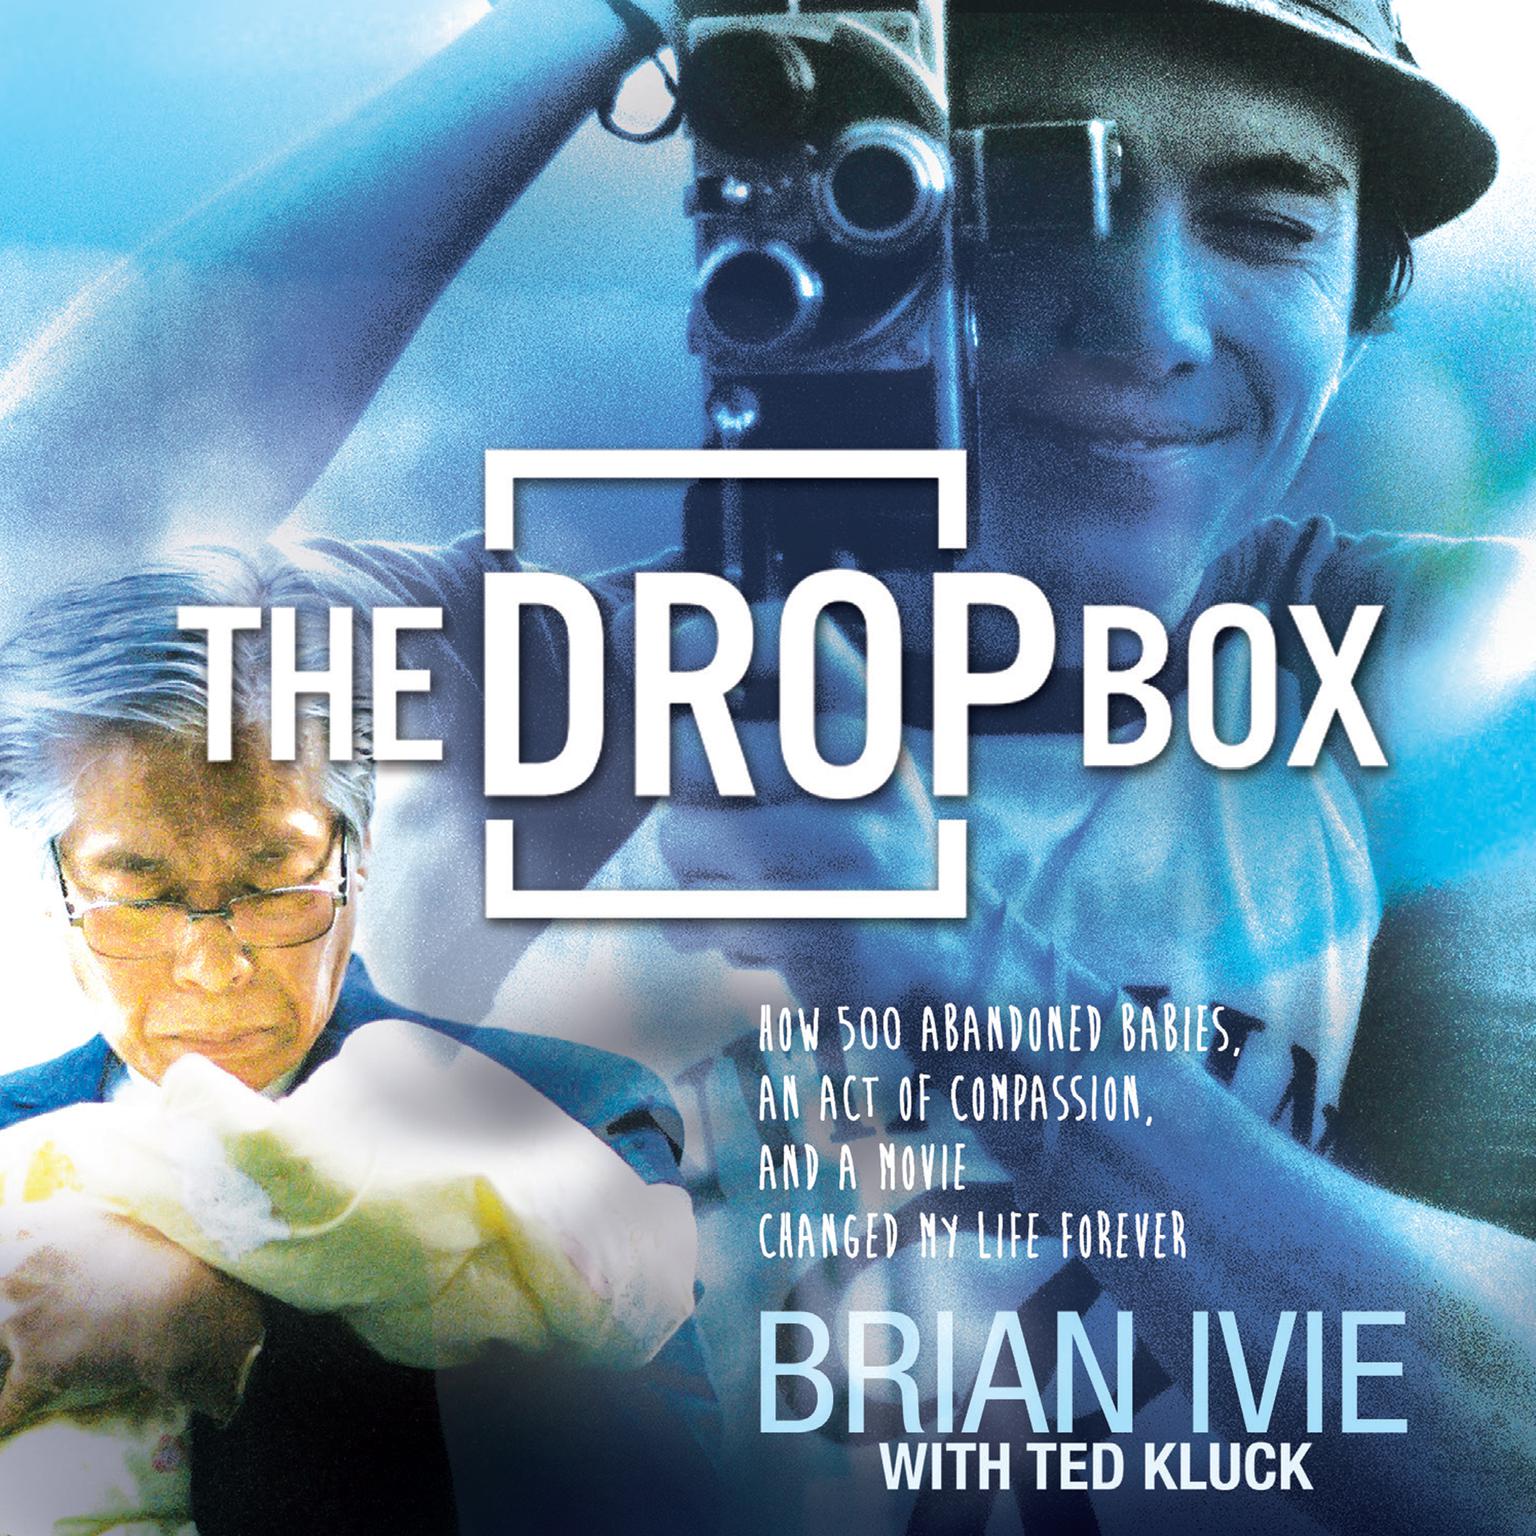 The Drop Box: How 500 Abandoned Babies, an Act of Compassion, and a Movie Changed My Life Forever Audiobook, by Brian Ivie